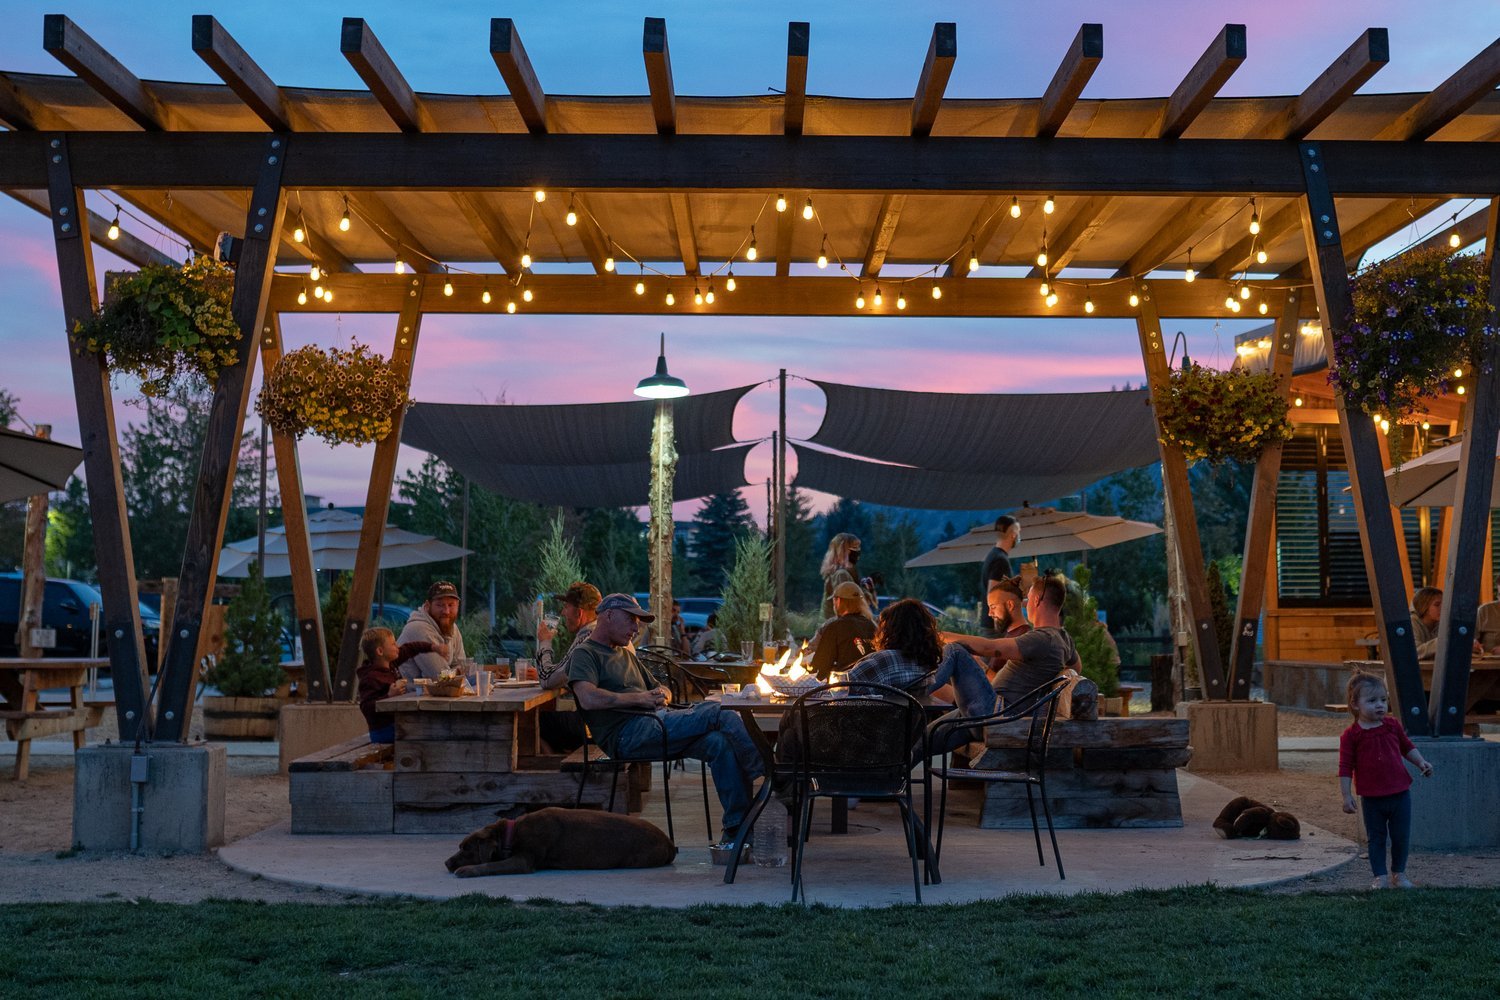 Group of diners sit under a pergola draped with string lights, gathered around a fire pit with the evening sky turning purple and pink